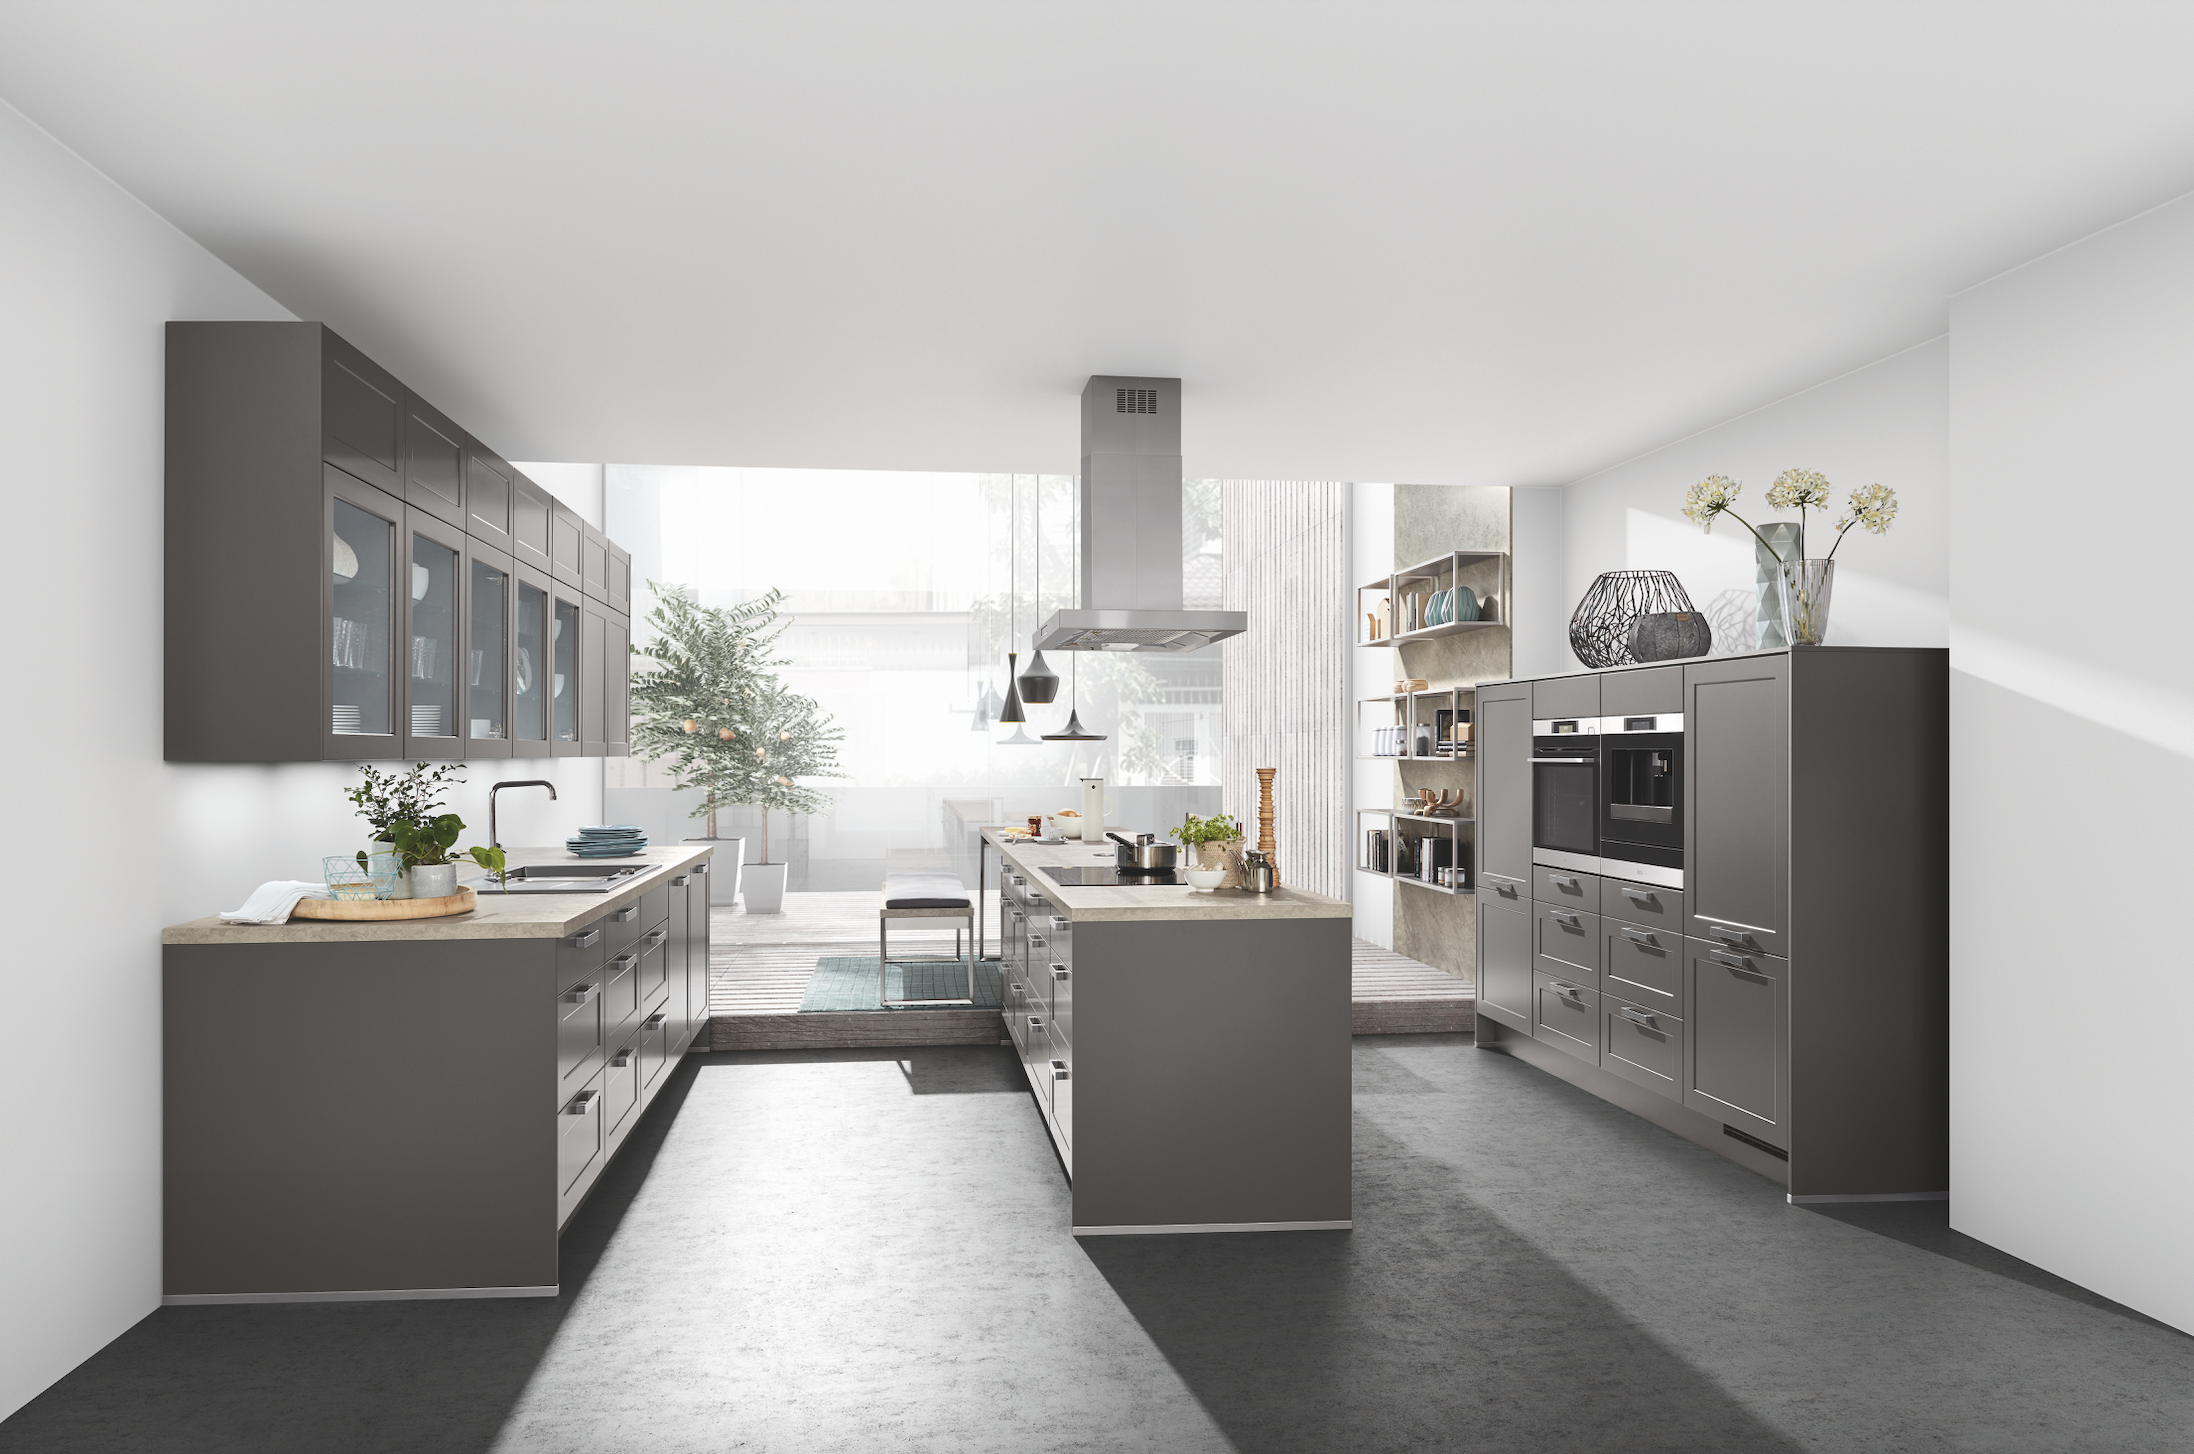 modular kitchens can be a permanent addition to your home